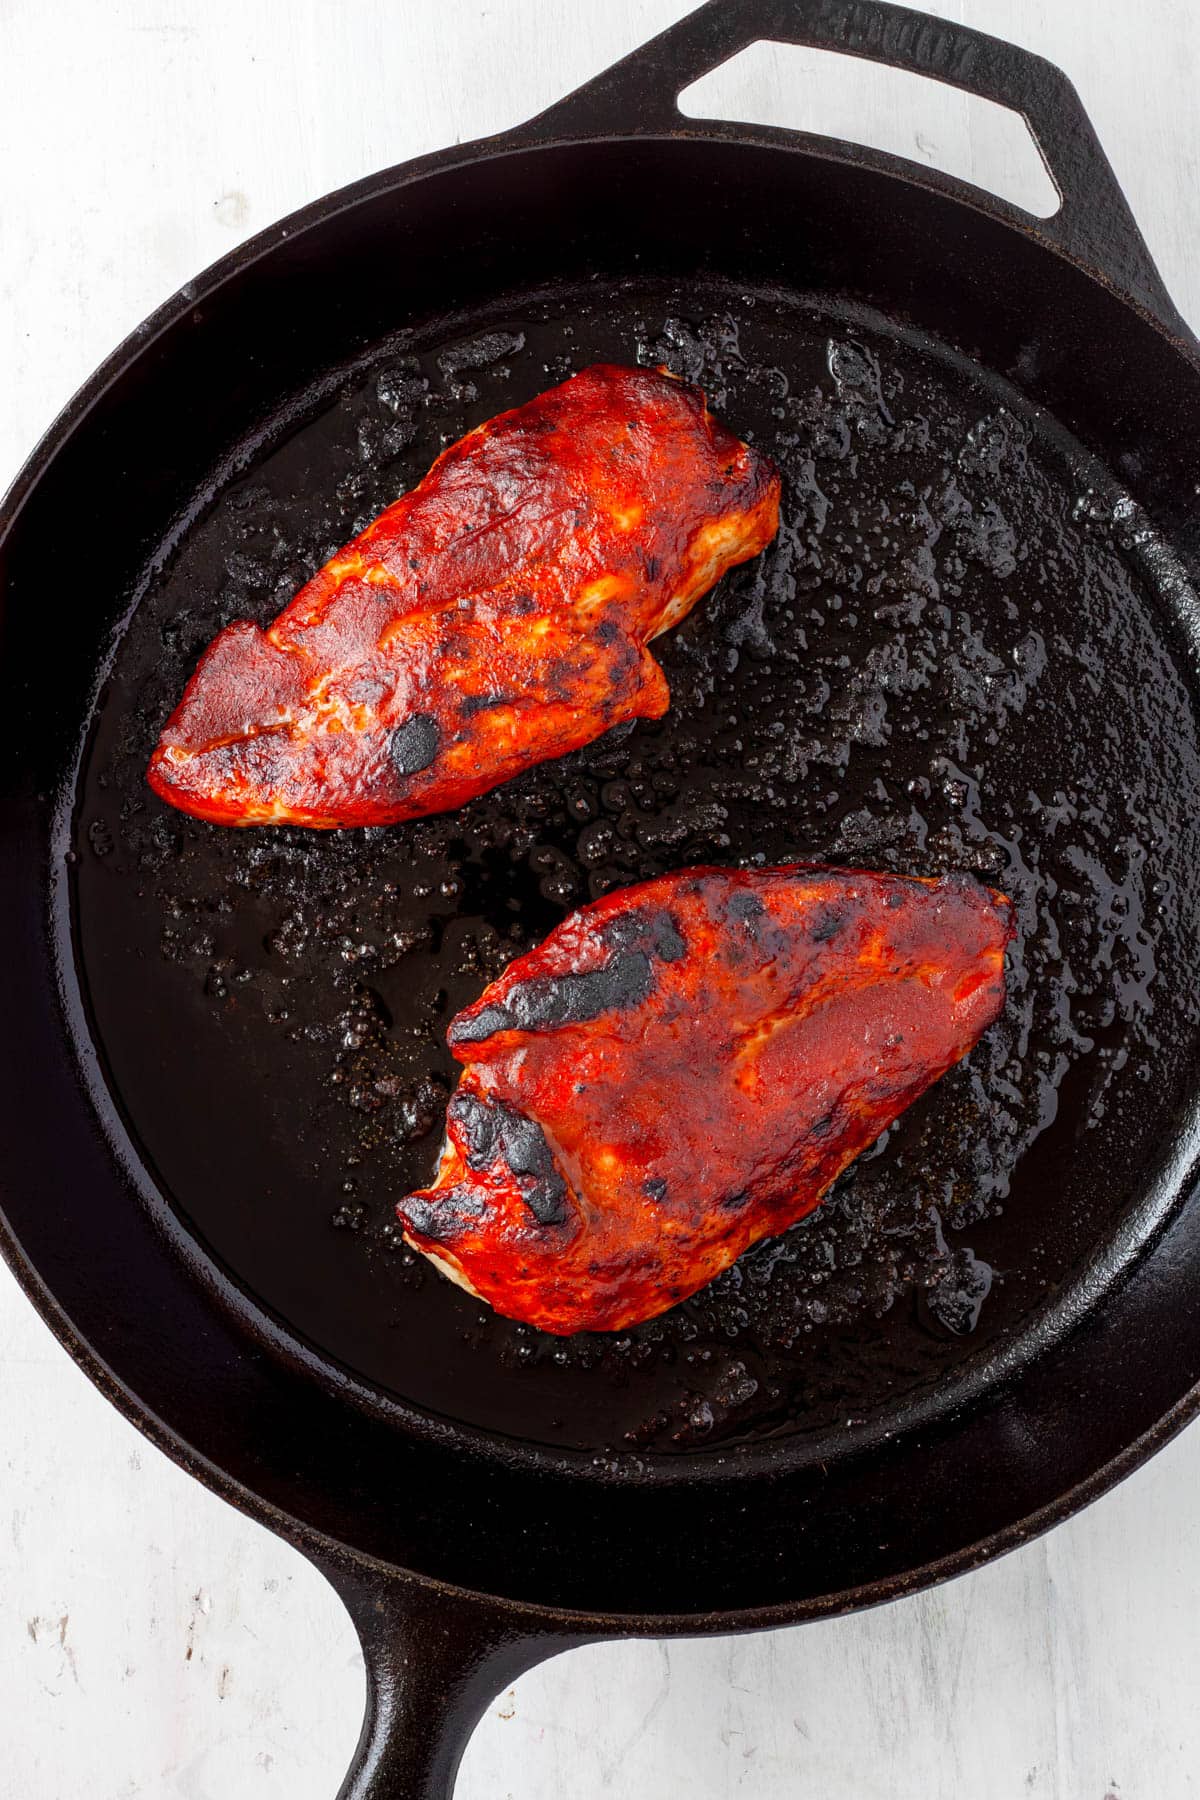 BBQ cast iron skillet chicken charred and brushed with more sauce.